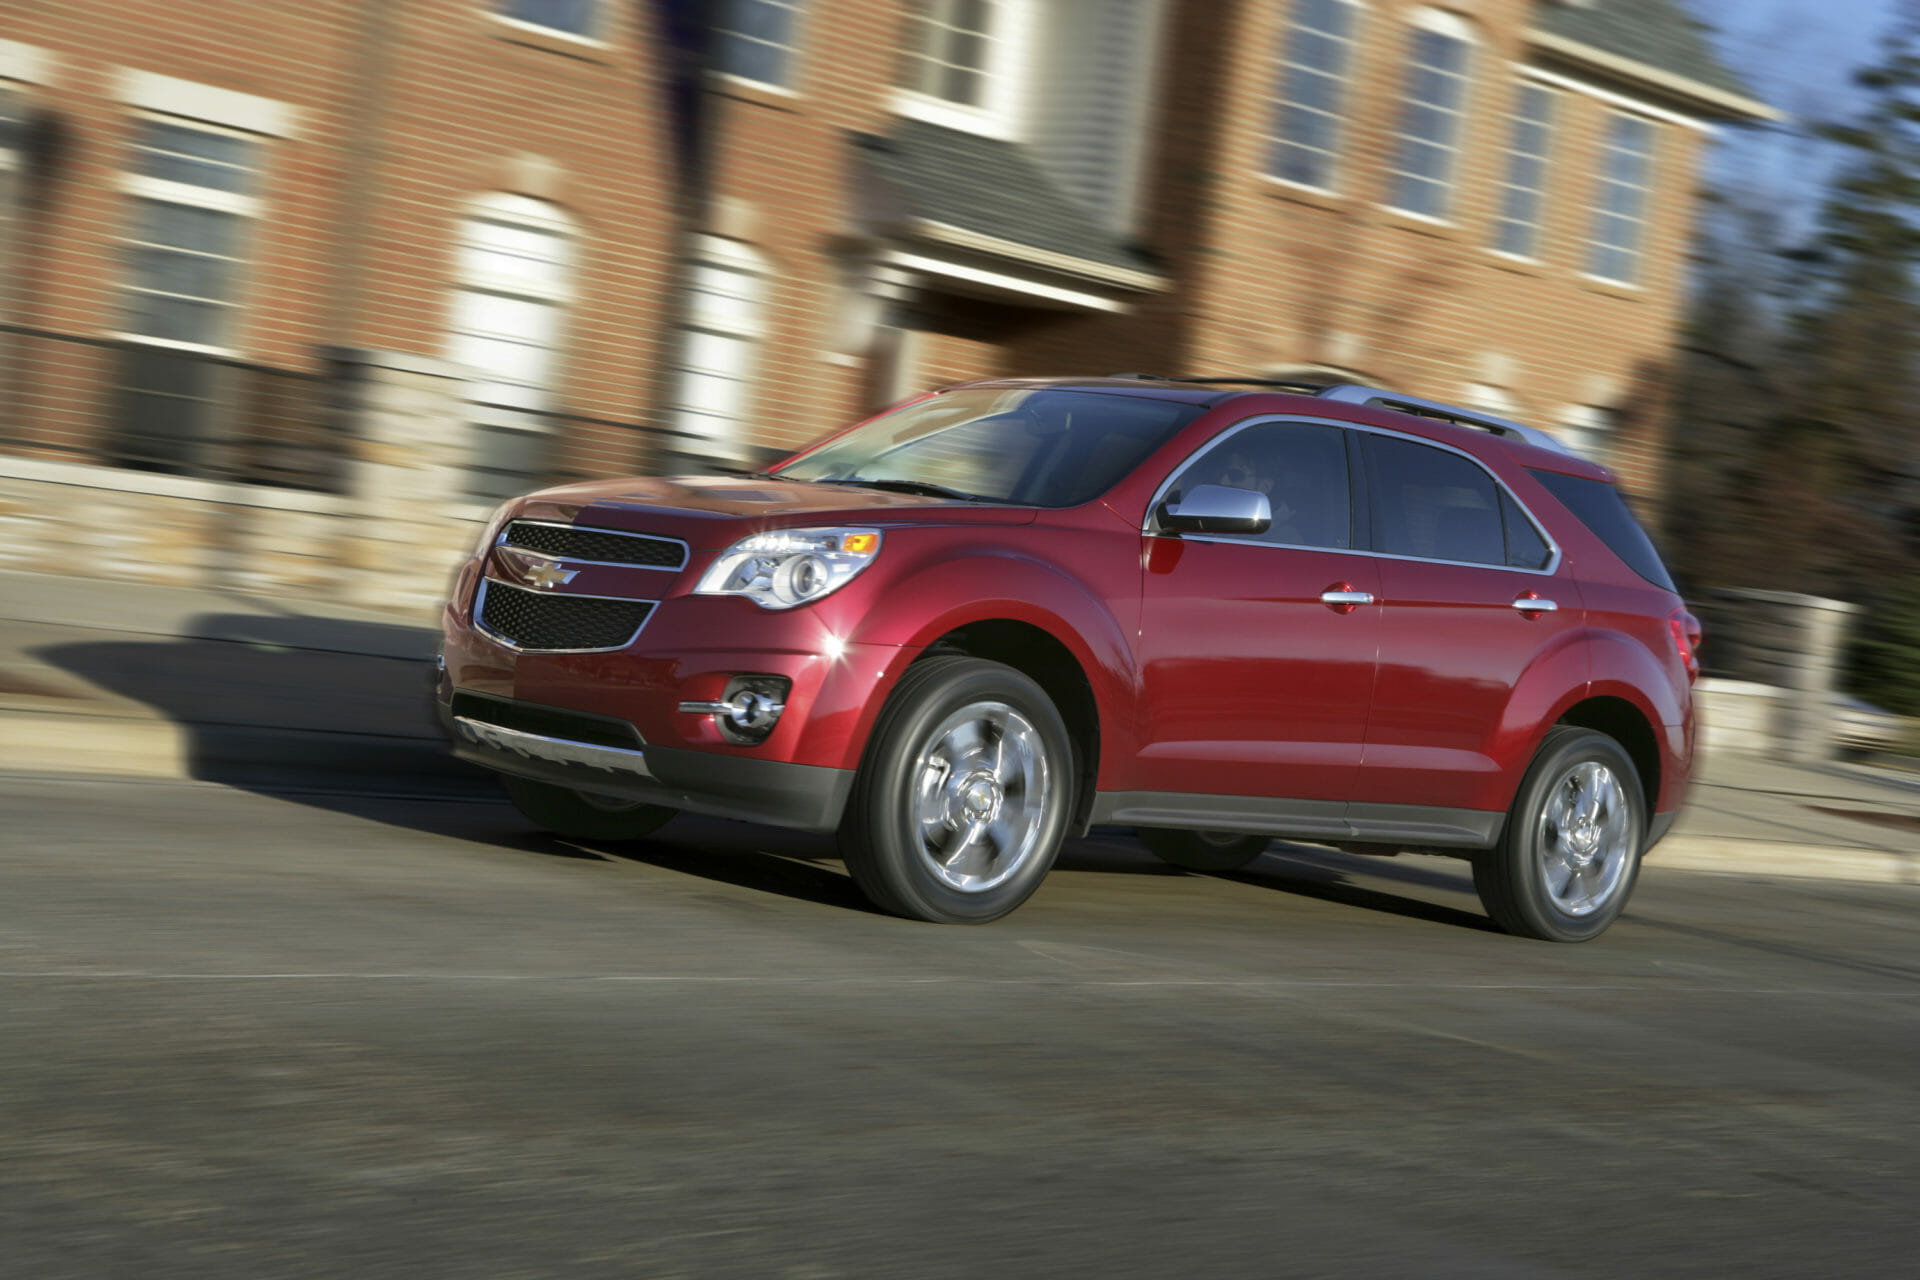 2011 Chevrolet Equinox Review: A Compact SUV With Serious Reliability Issues 